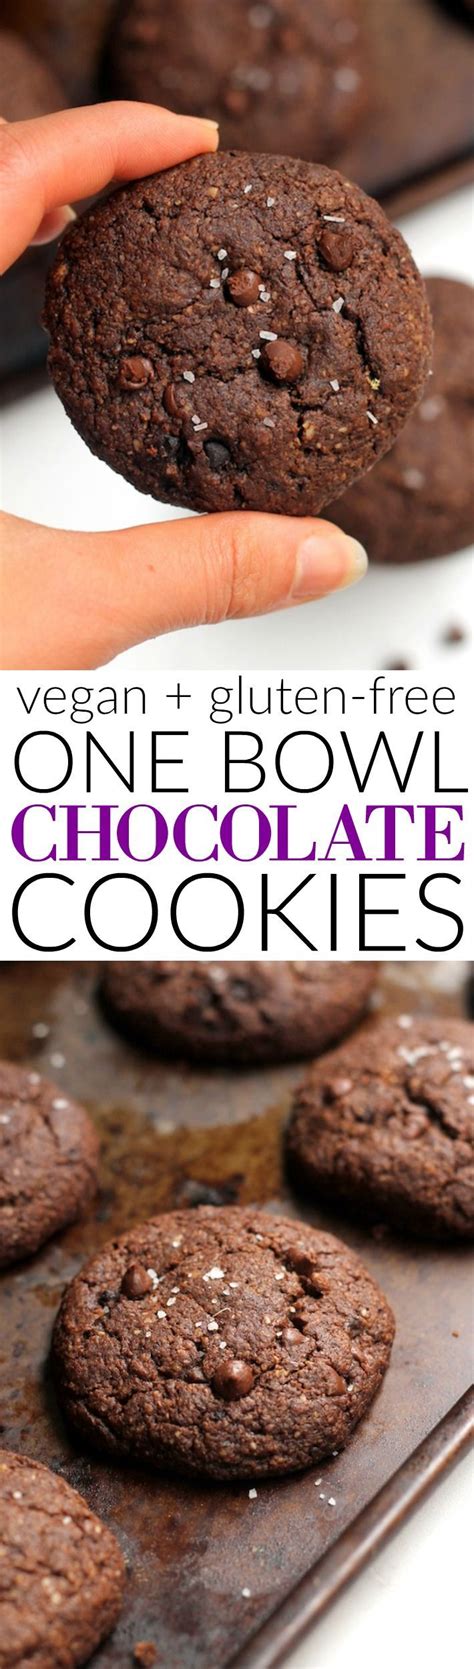 These Decadent Double Chocolate Cookies Are Packed With Whole Grains